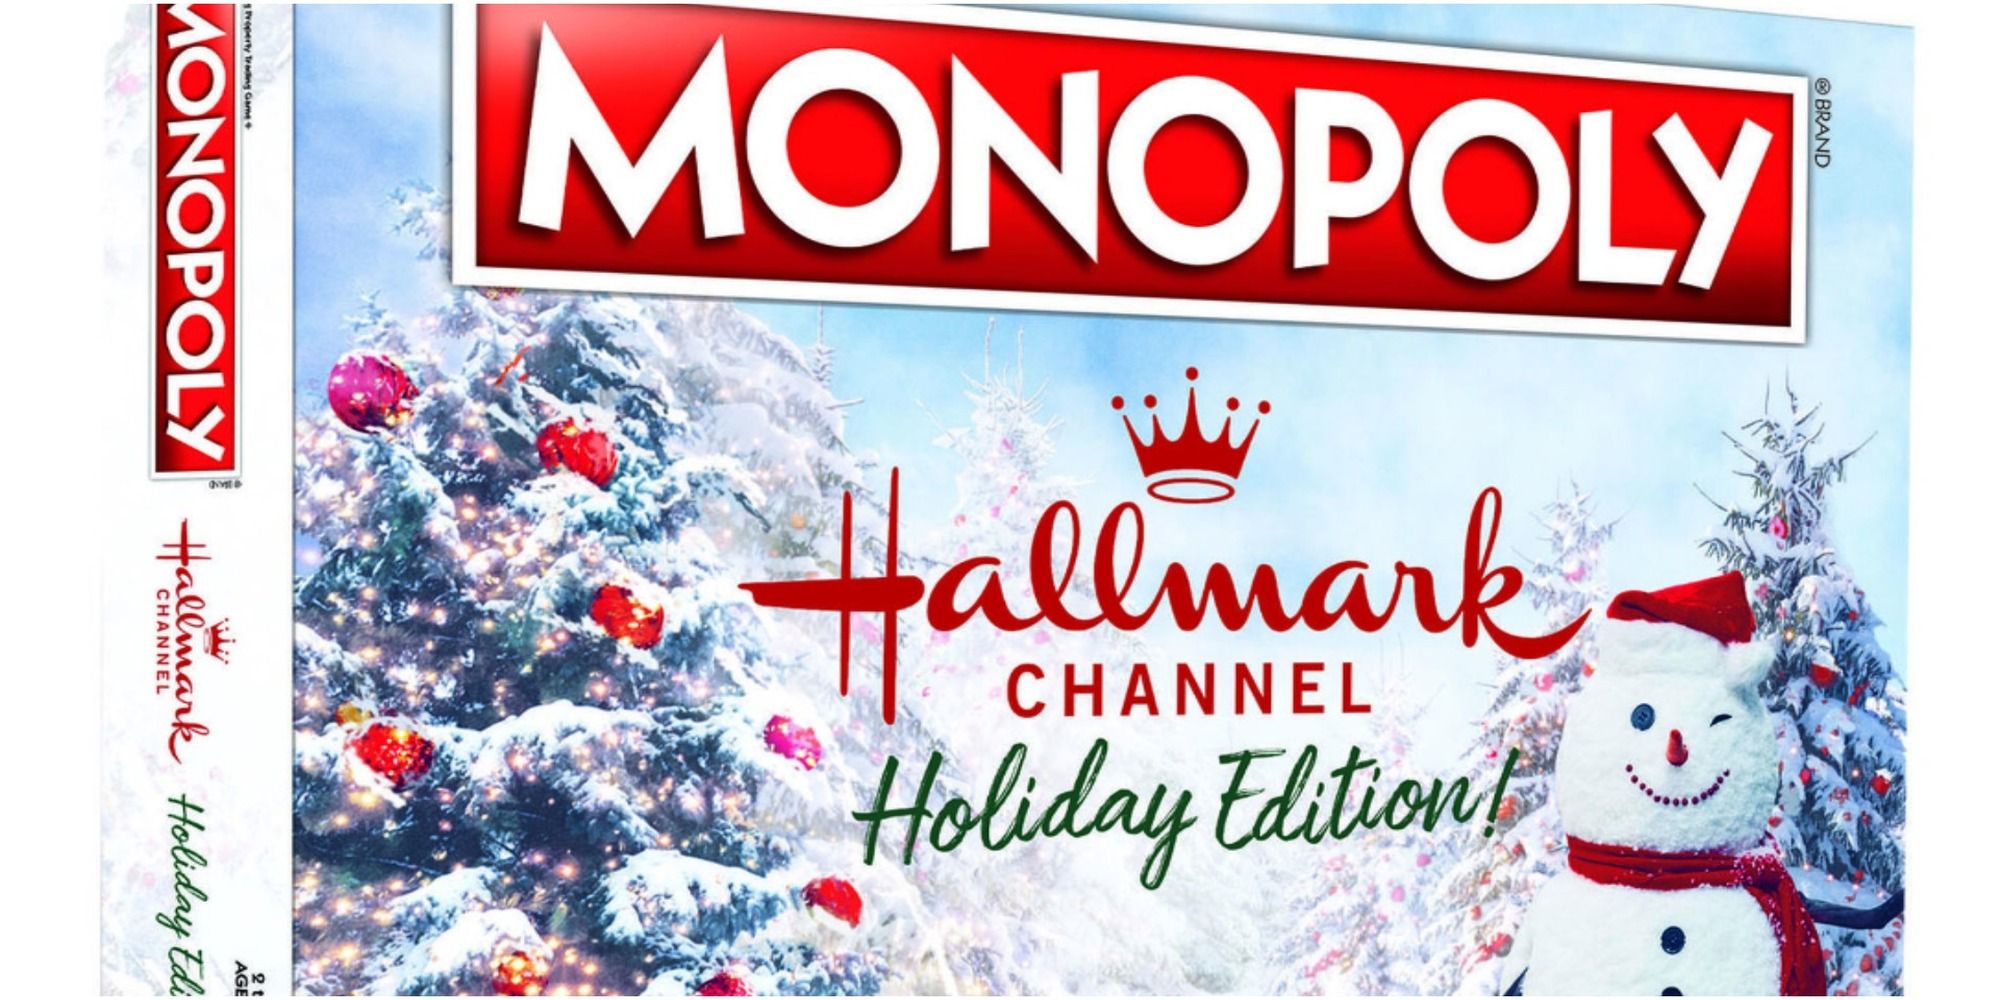 Monopoly-Hallmark-Channel-Holiday-Edition-Board-Game